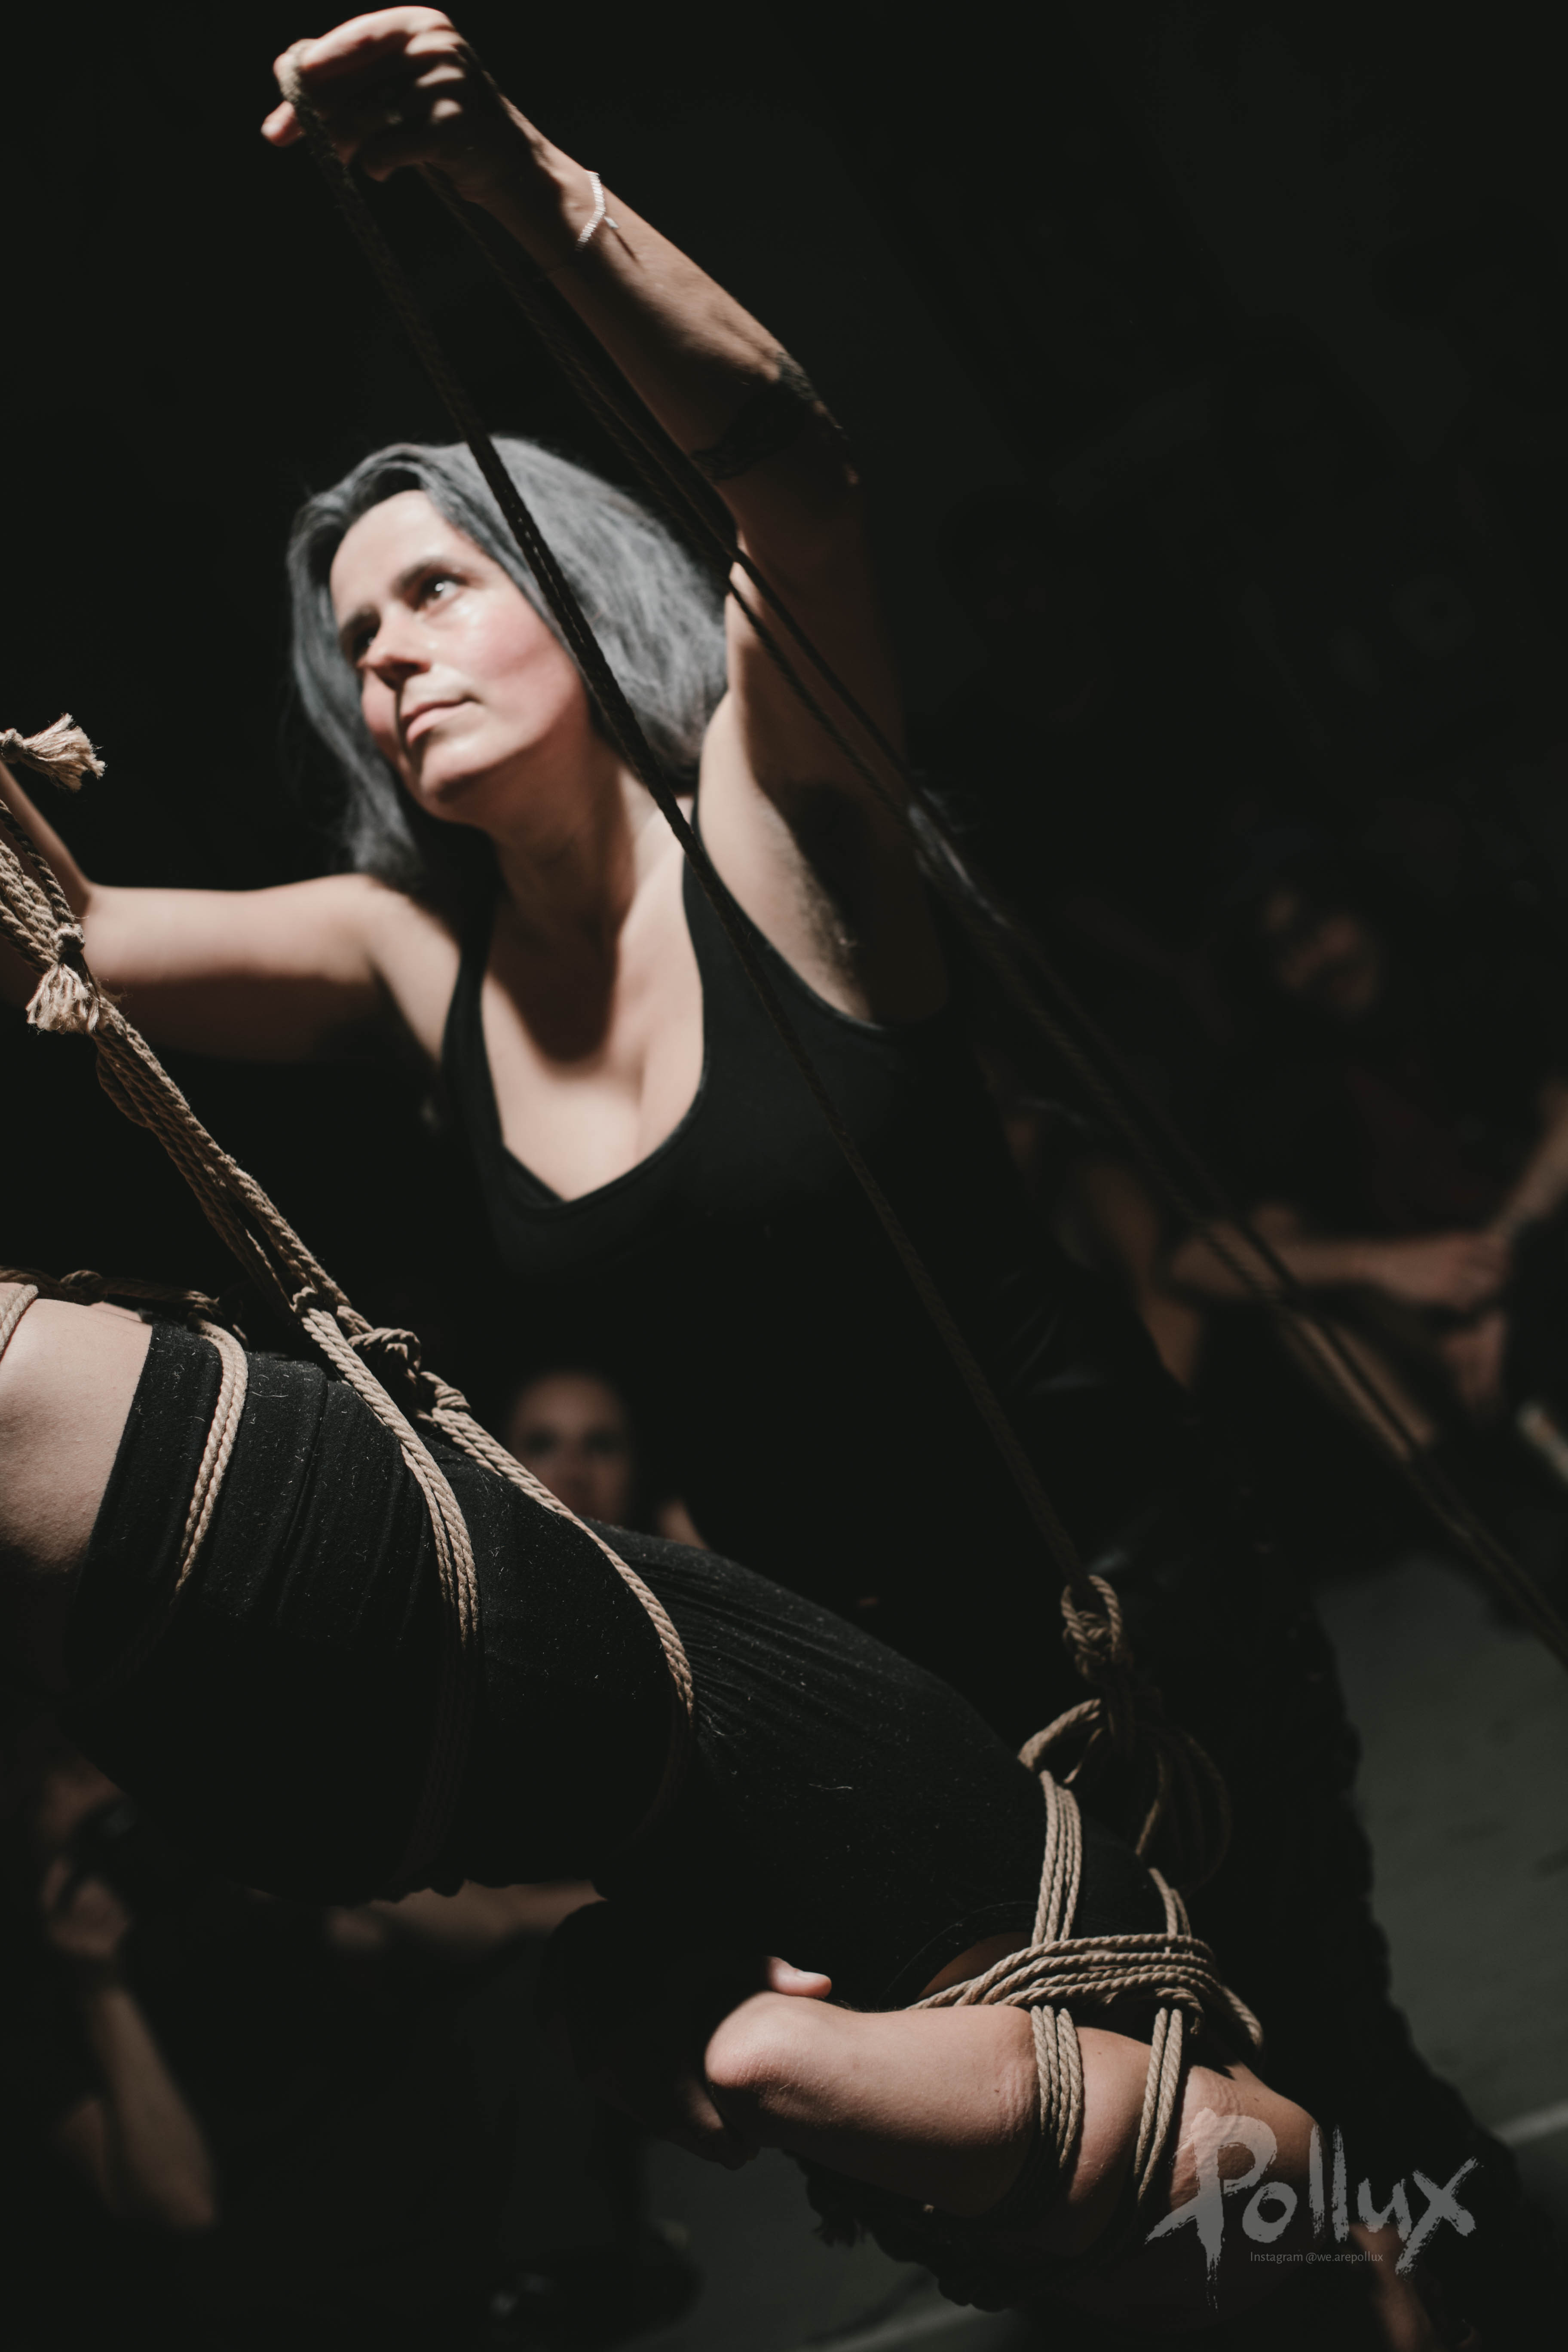 Jo Pollux Bondage performance at Bei Ruth in 2017 with Lou Smorals. Photo by https://www.instagram.com/we.arepollux/